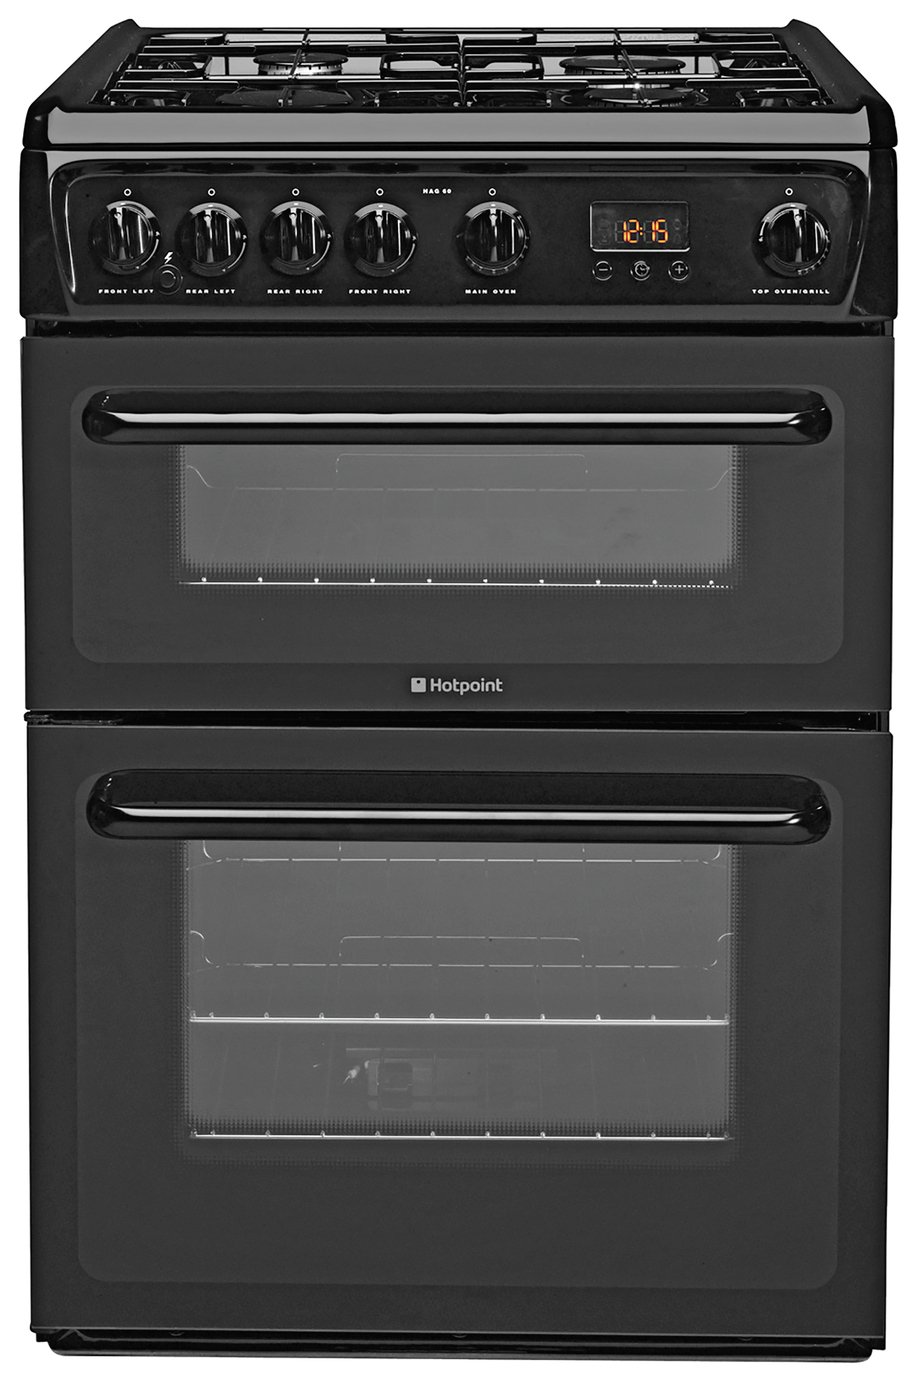 Hotpoint HAG60K 60cm Double Oven Gas Cooker review